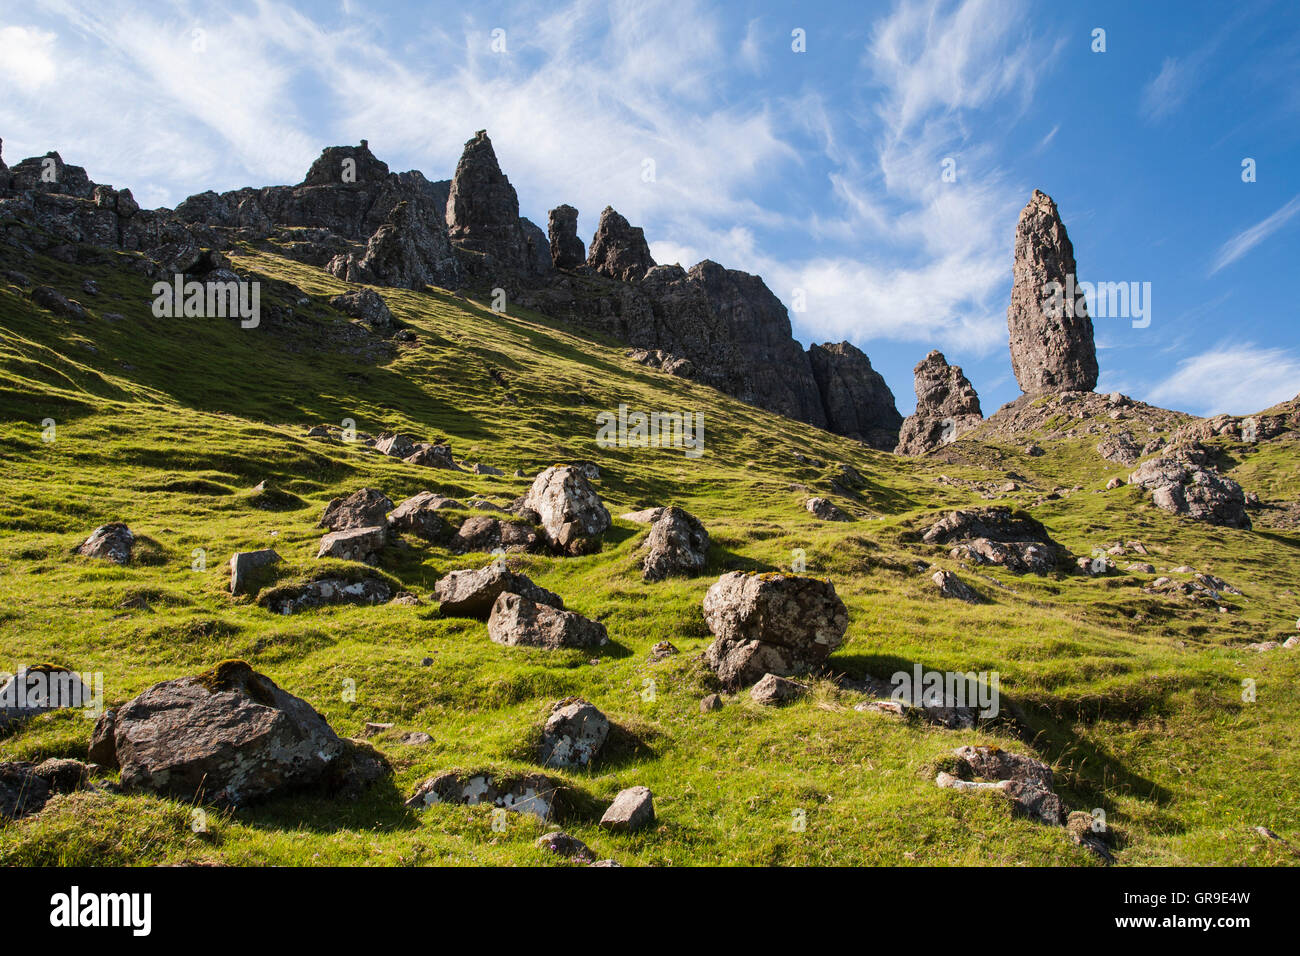 The Old Man of Storr with The Storr behind, Isle of Skye, Scotland, United Kingdom Stock Photo